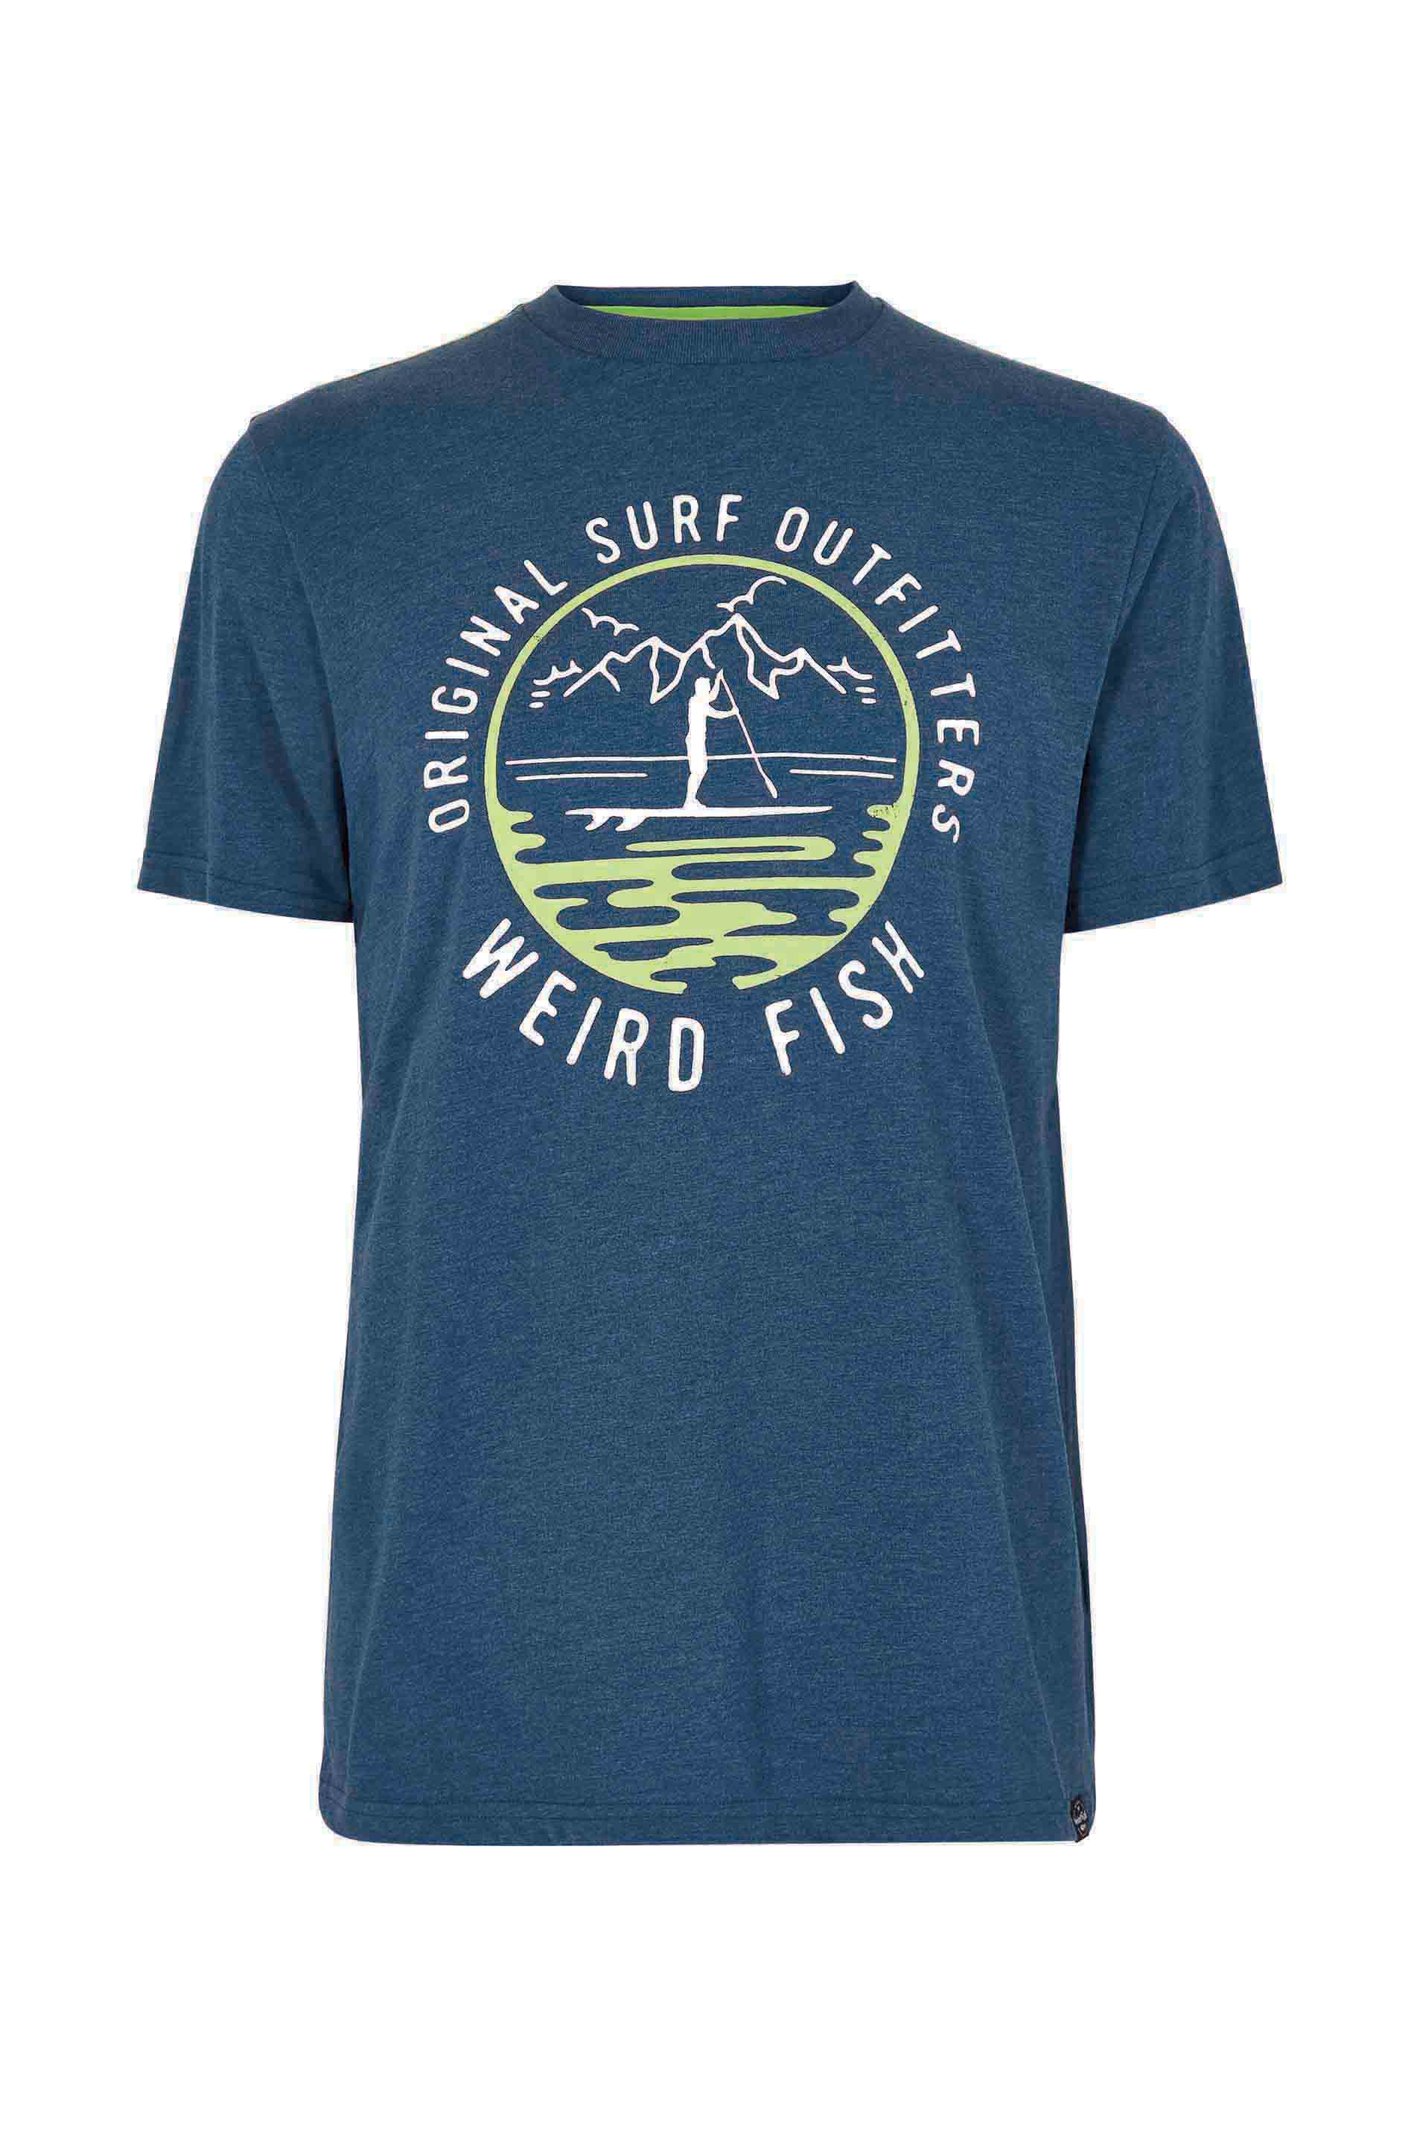 Weird Fish Paddle Eco Graphic T-Shirt Ensign Blue Size 3XL